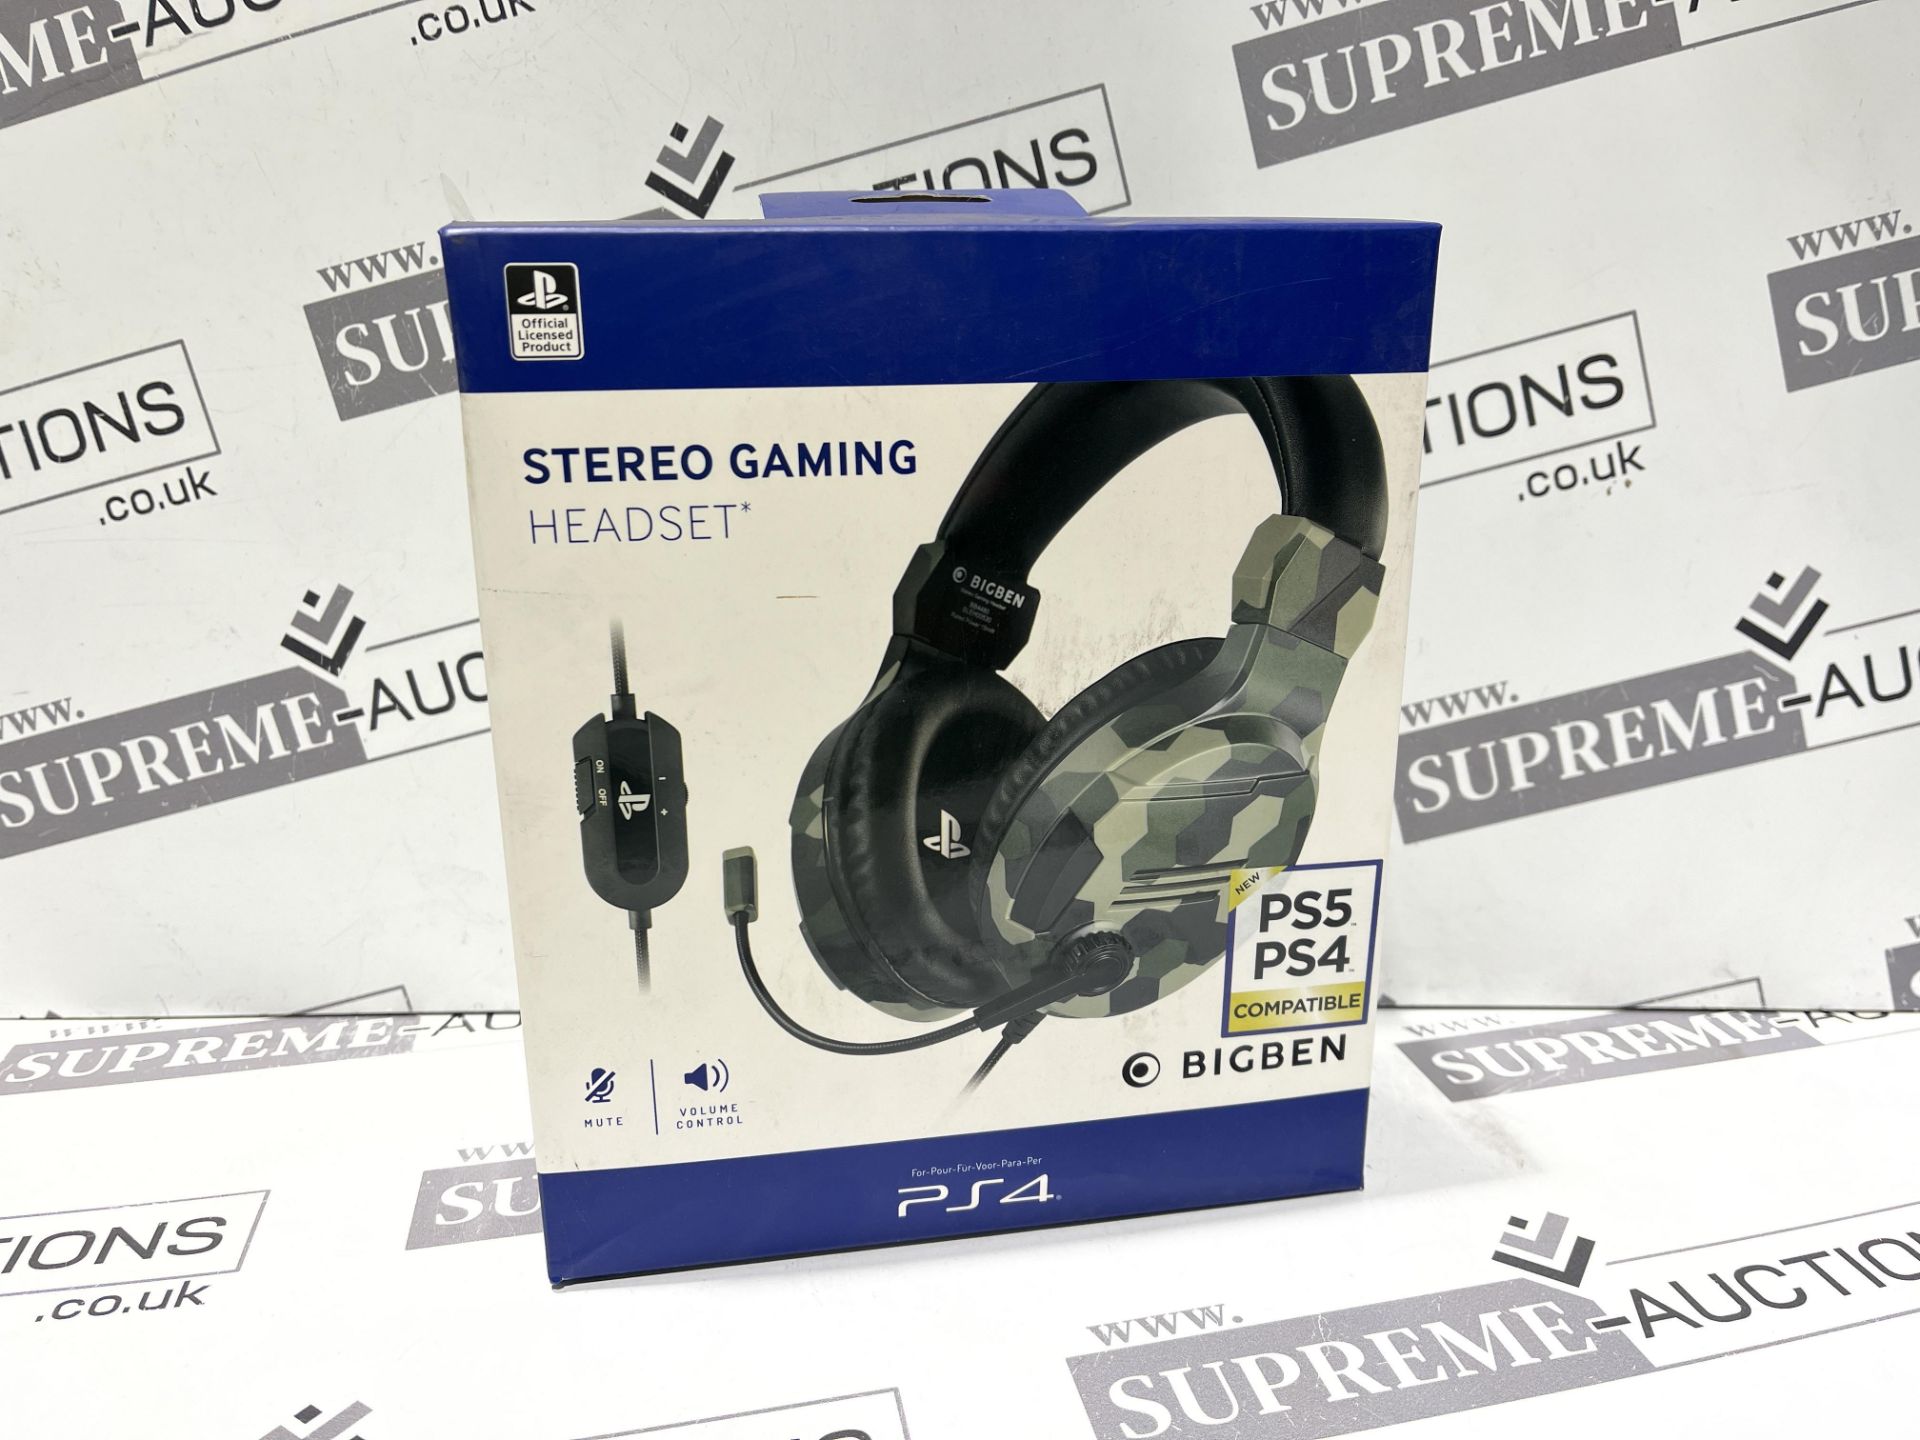 7 X BRAND NEW BIG BEN PS4/PS5 STEREO GAMING HEADSETS P4